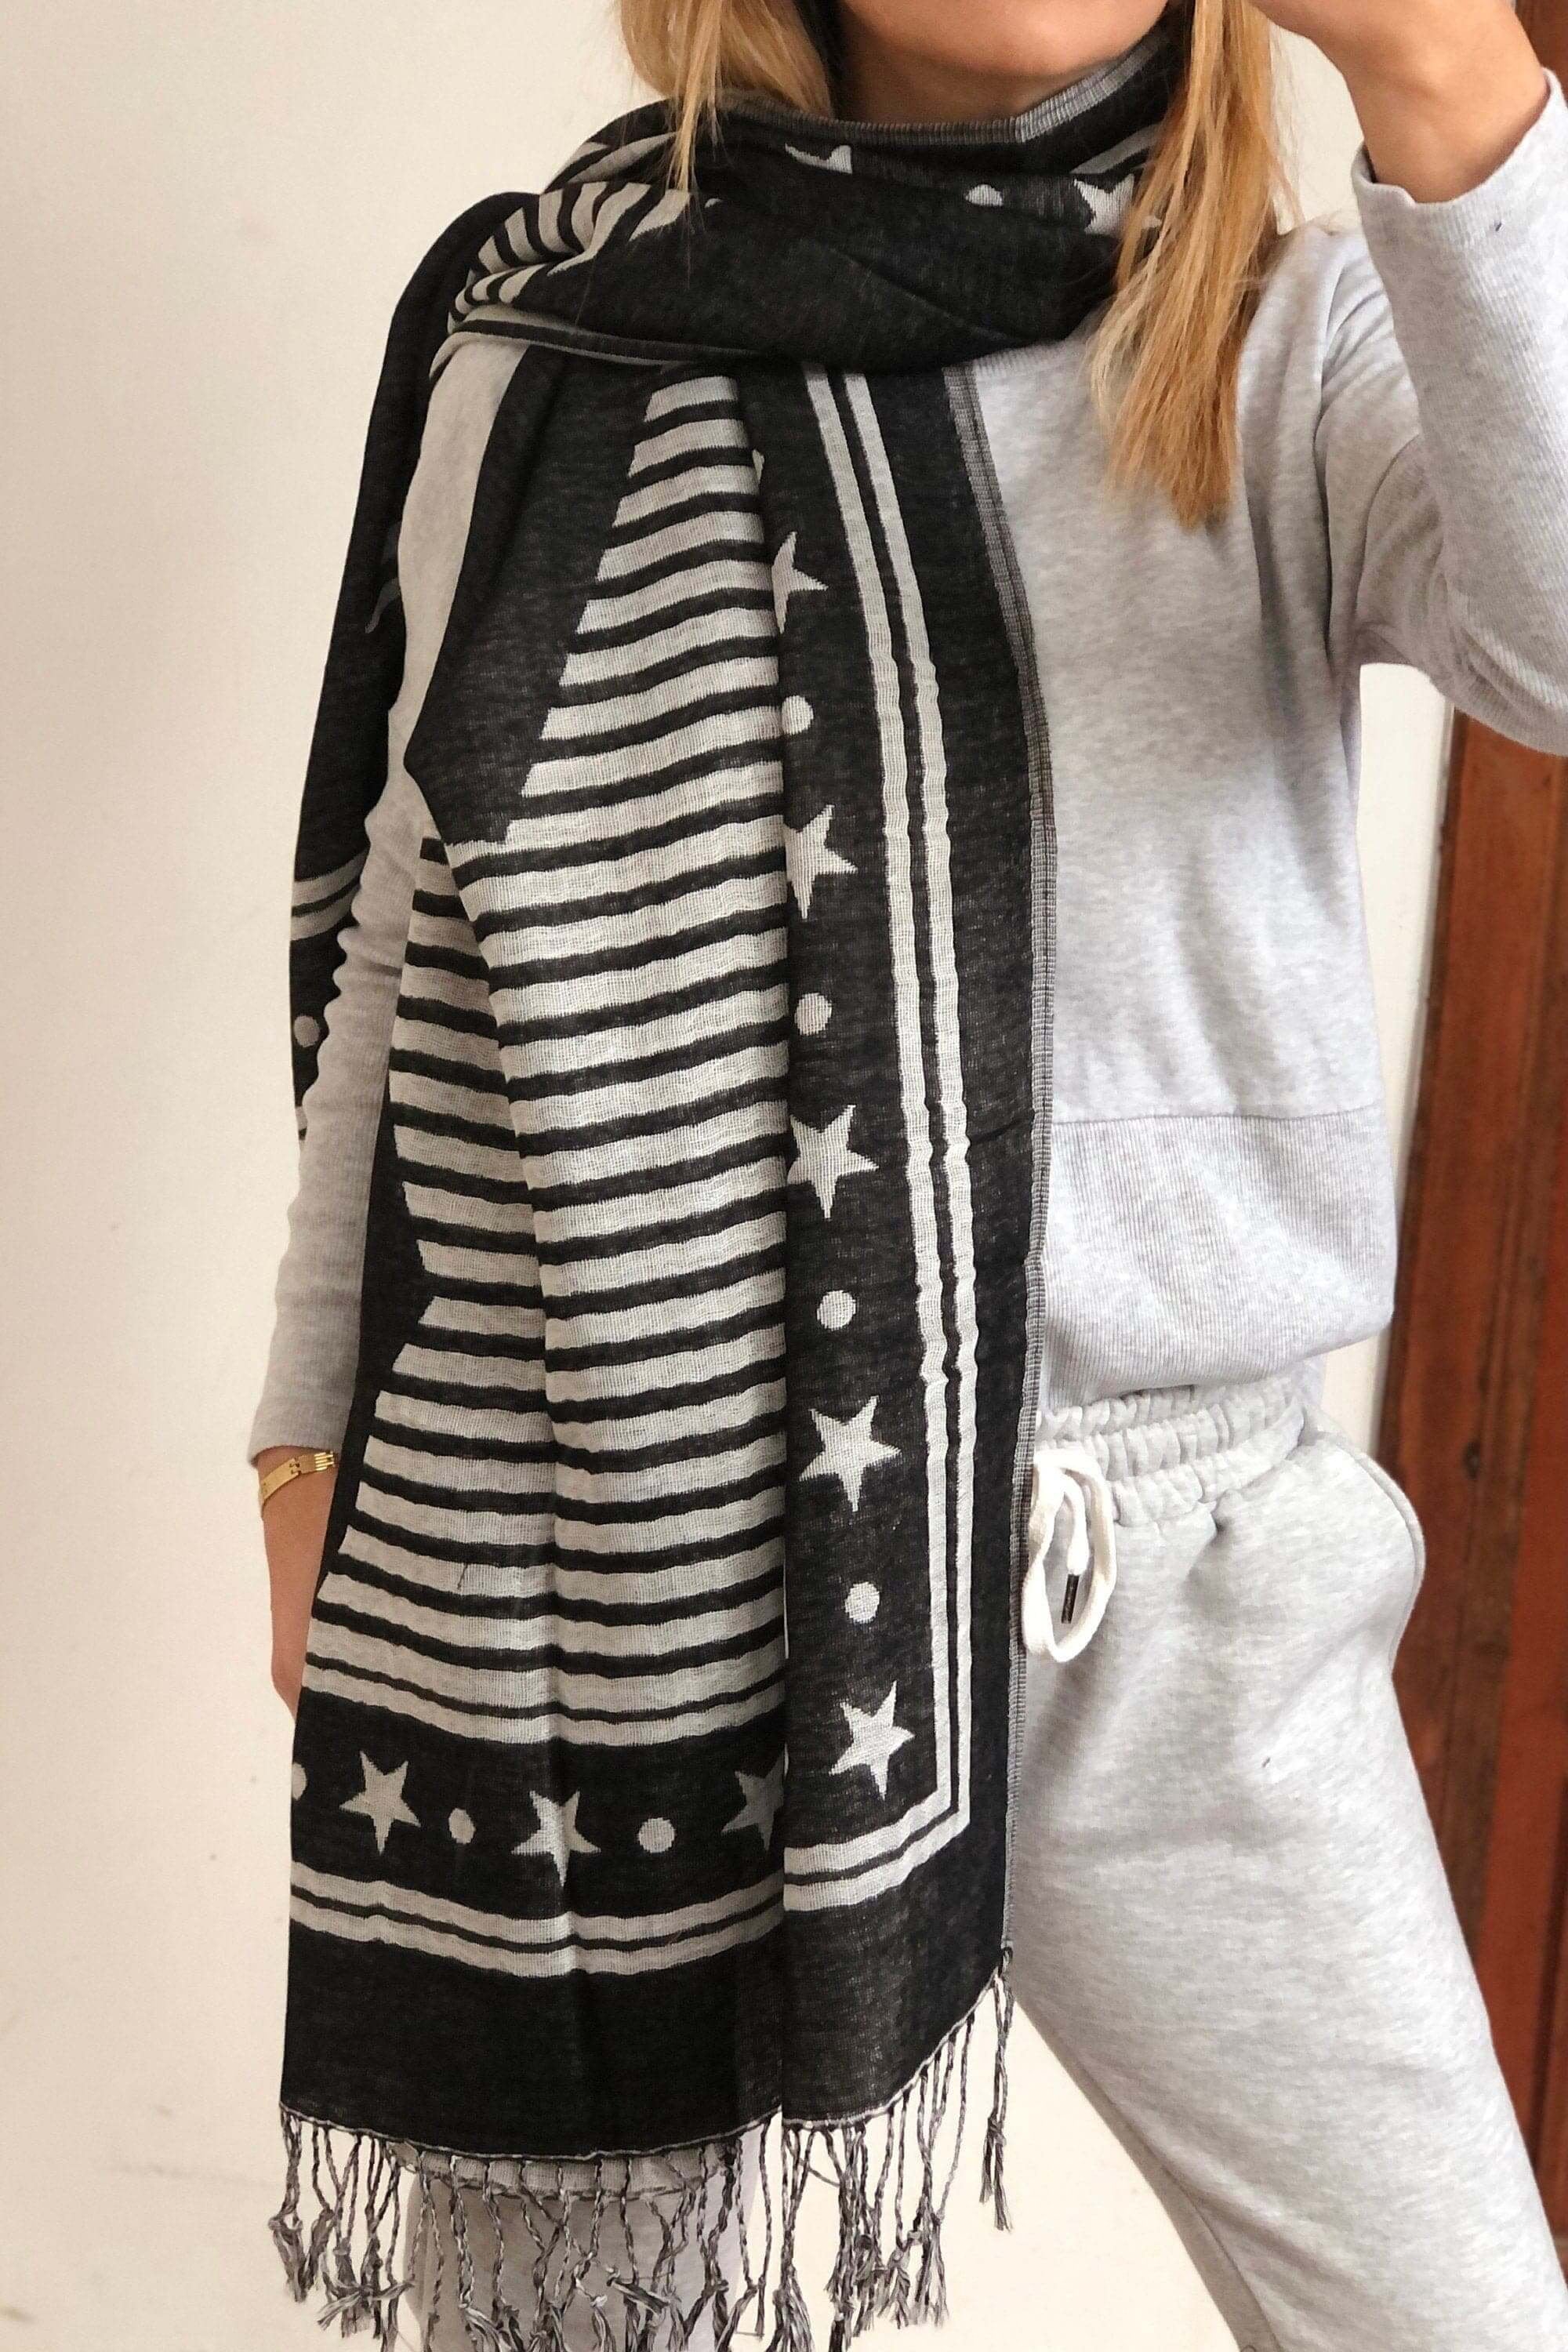 Star Pattern Cotton Scarf: A stylish cotton scarf featuring a fun star pattern in shades of black and white. Perfect for adding a touch of whimsy to any outfit.